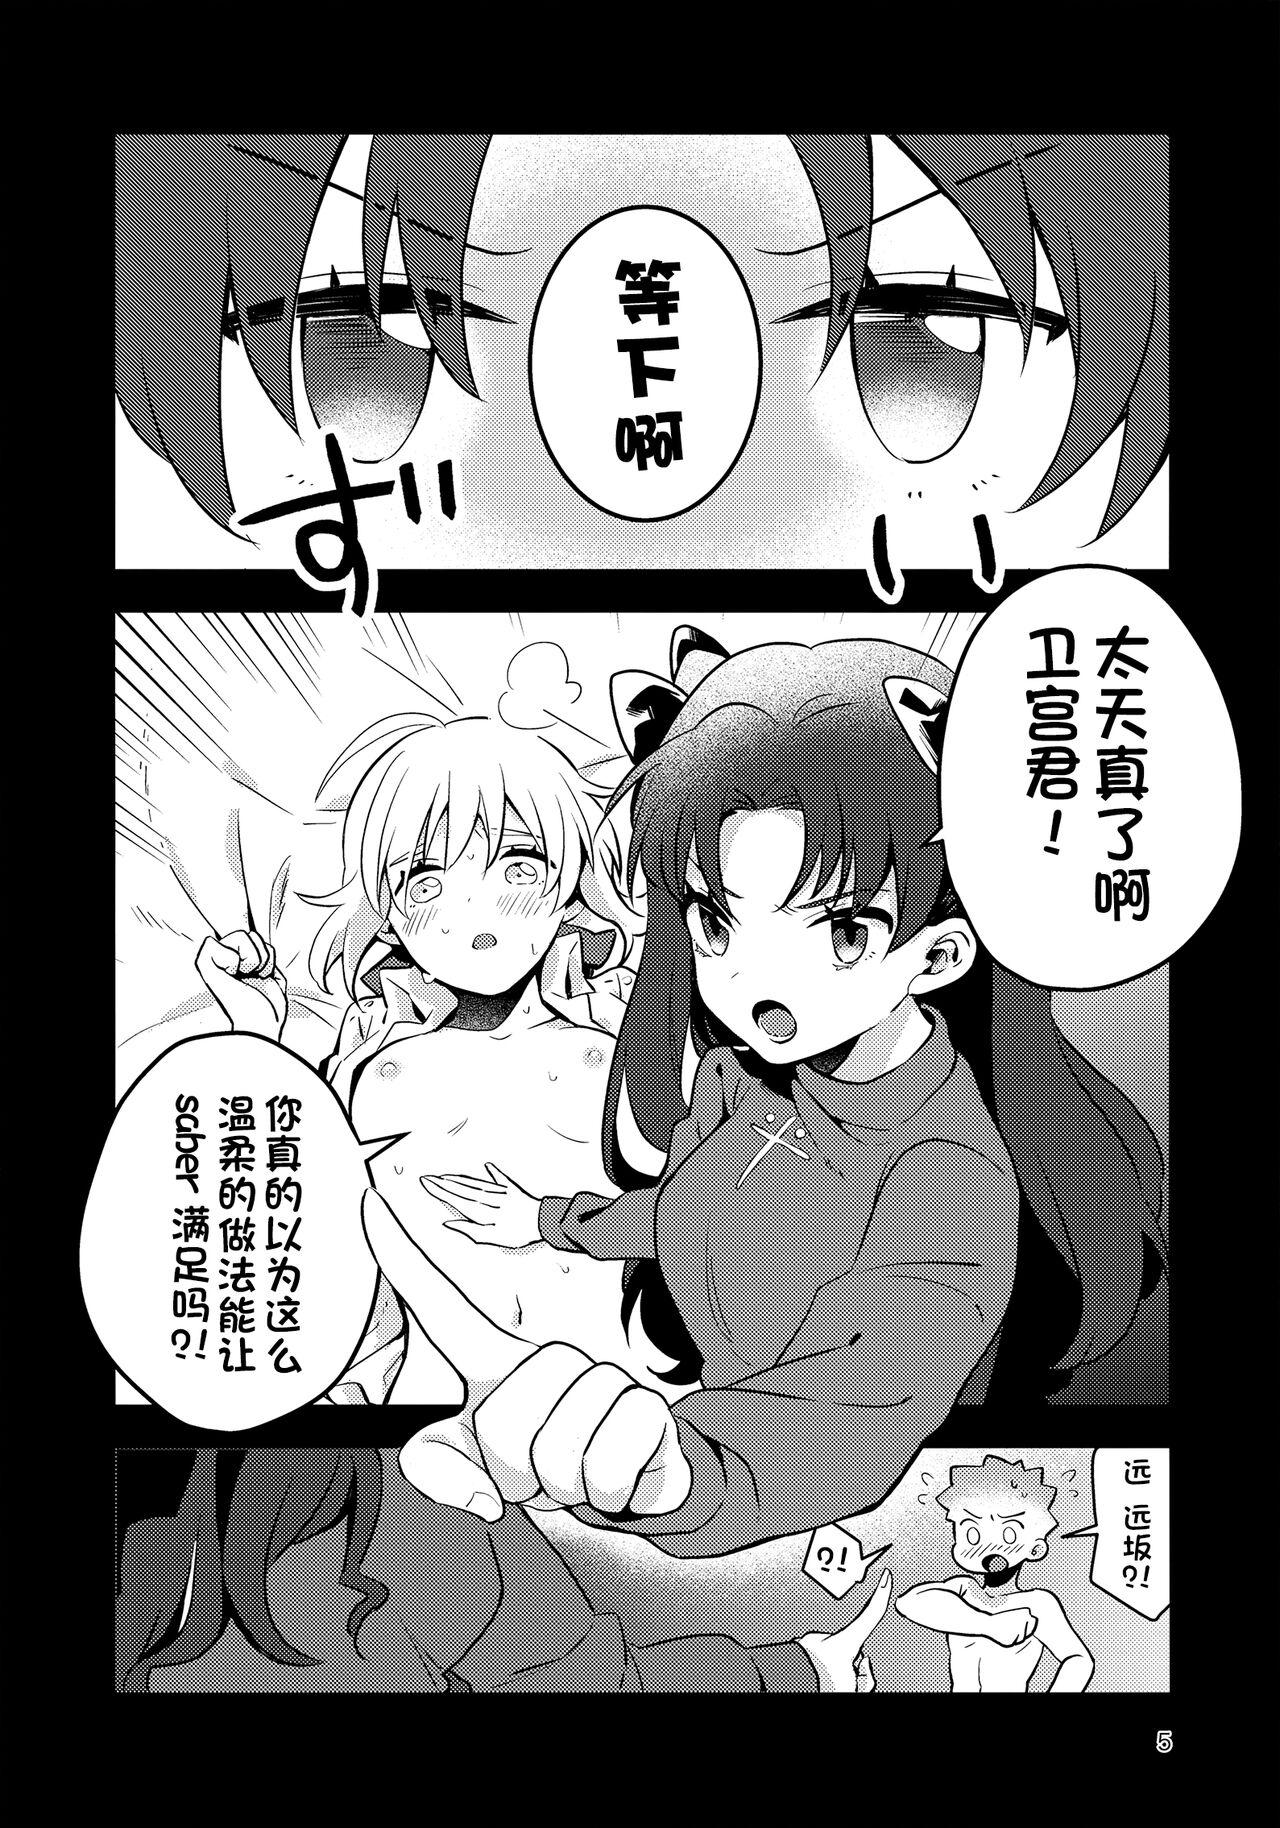 Best Blowjob Ever Before dawn - Fate stay night Red Head - Page 4